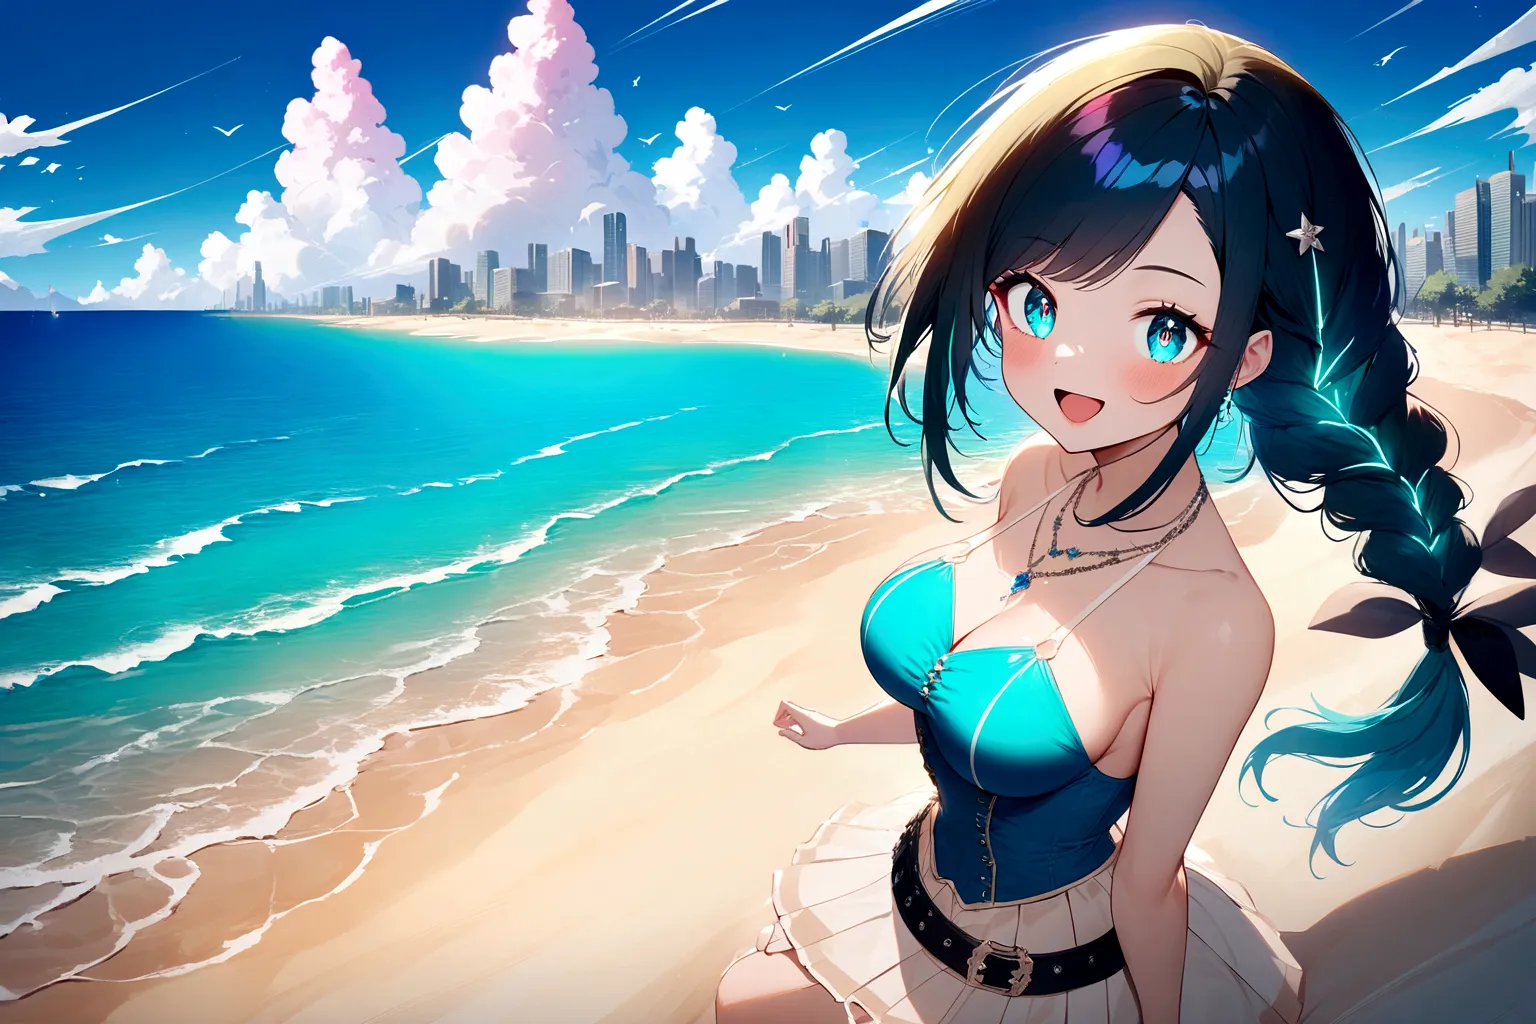 A breathtaking masterpiece unfolds as a stunning anime girl stands confidently, gazing directly at the viewer with an excited expression. Her long, aquamarine hair flows down her back like a river of green neon, adorned with a single braid and striking asy...